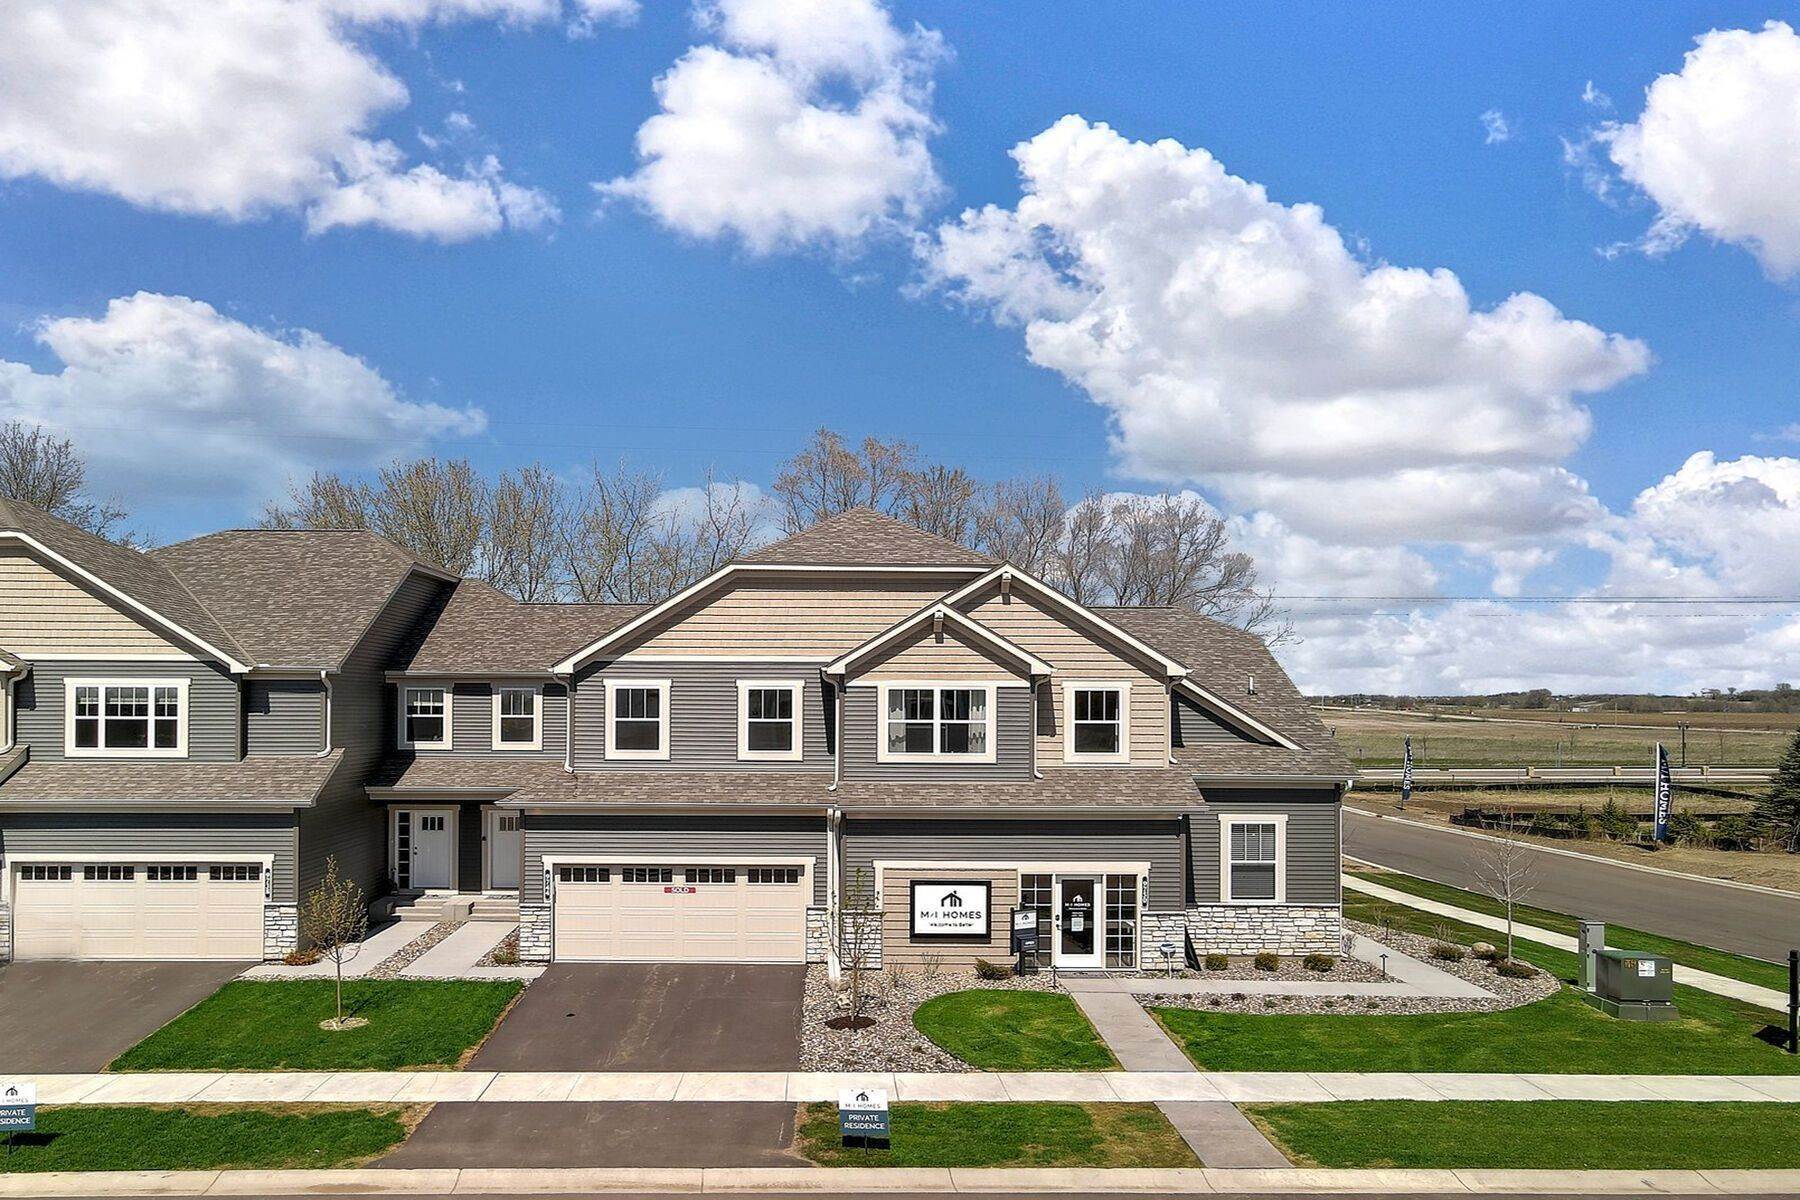 19. Woodward Ponds κτίριο σε 9750 65th Street South, Cottage Grove, MN 55016